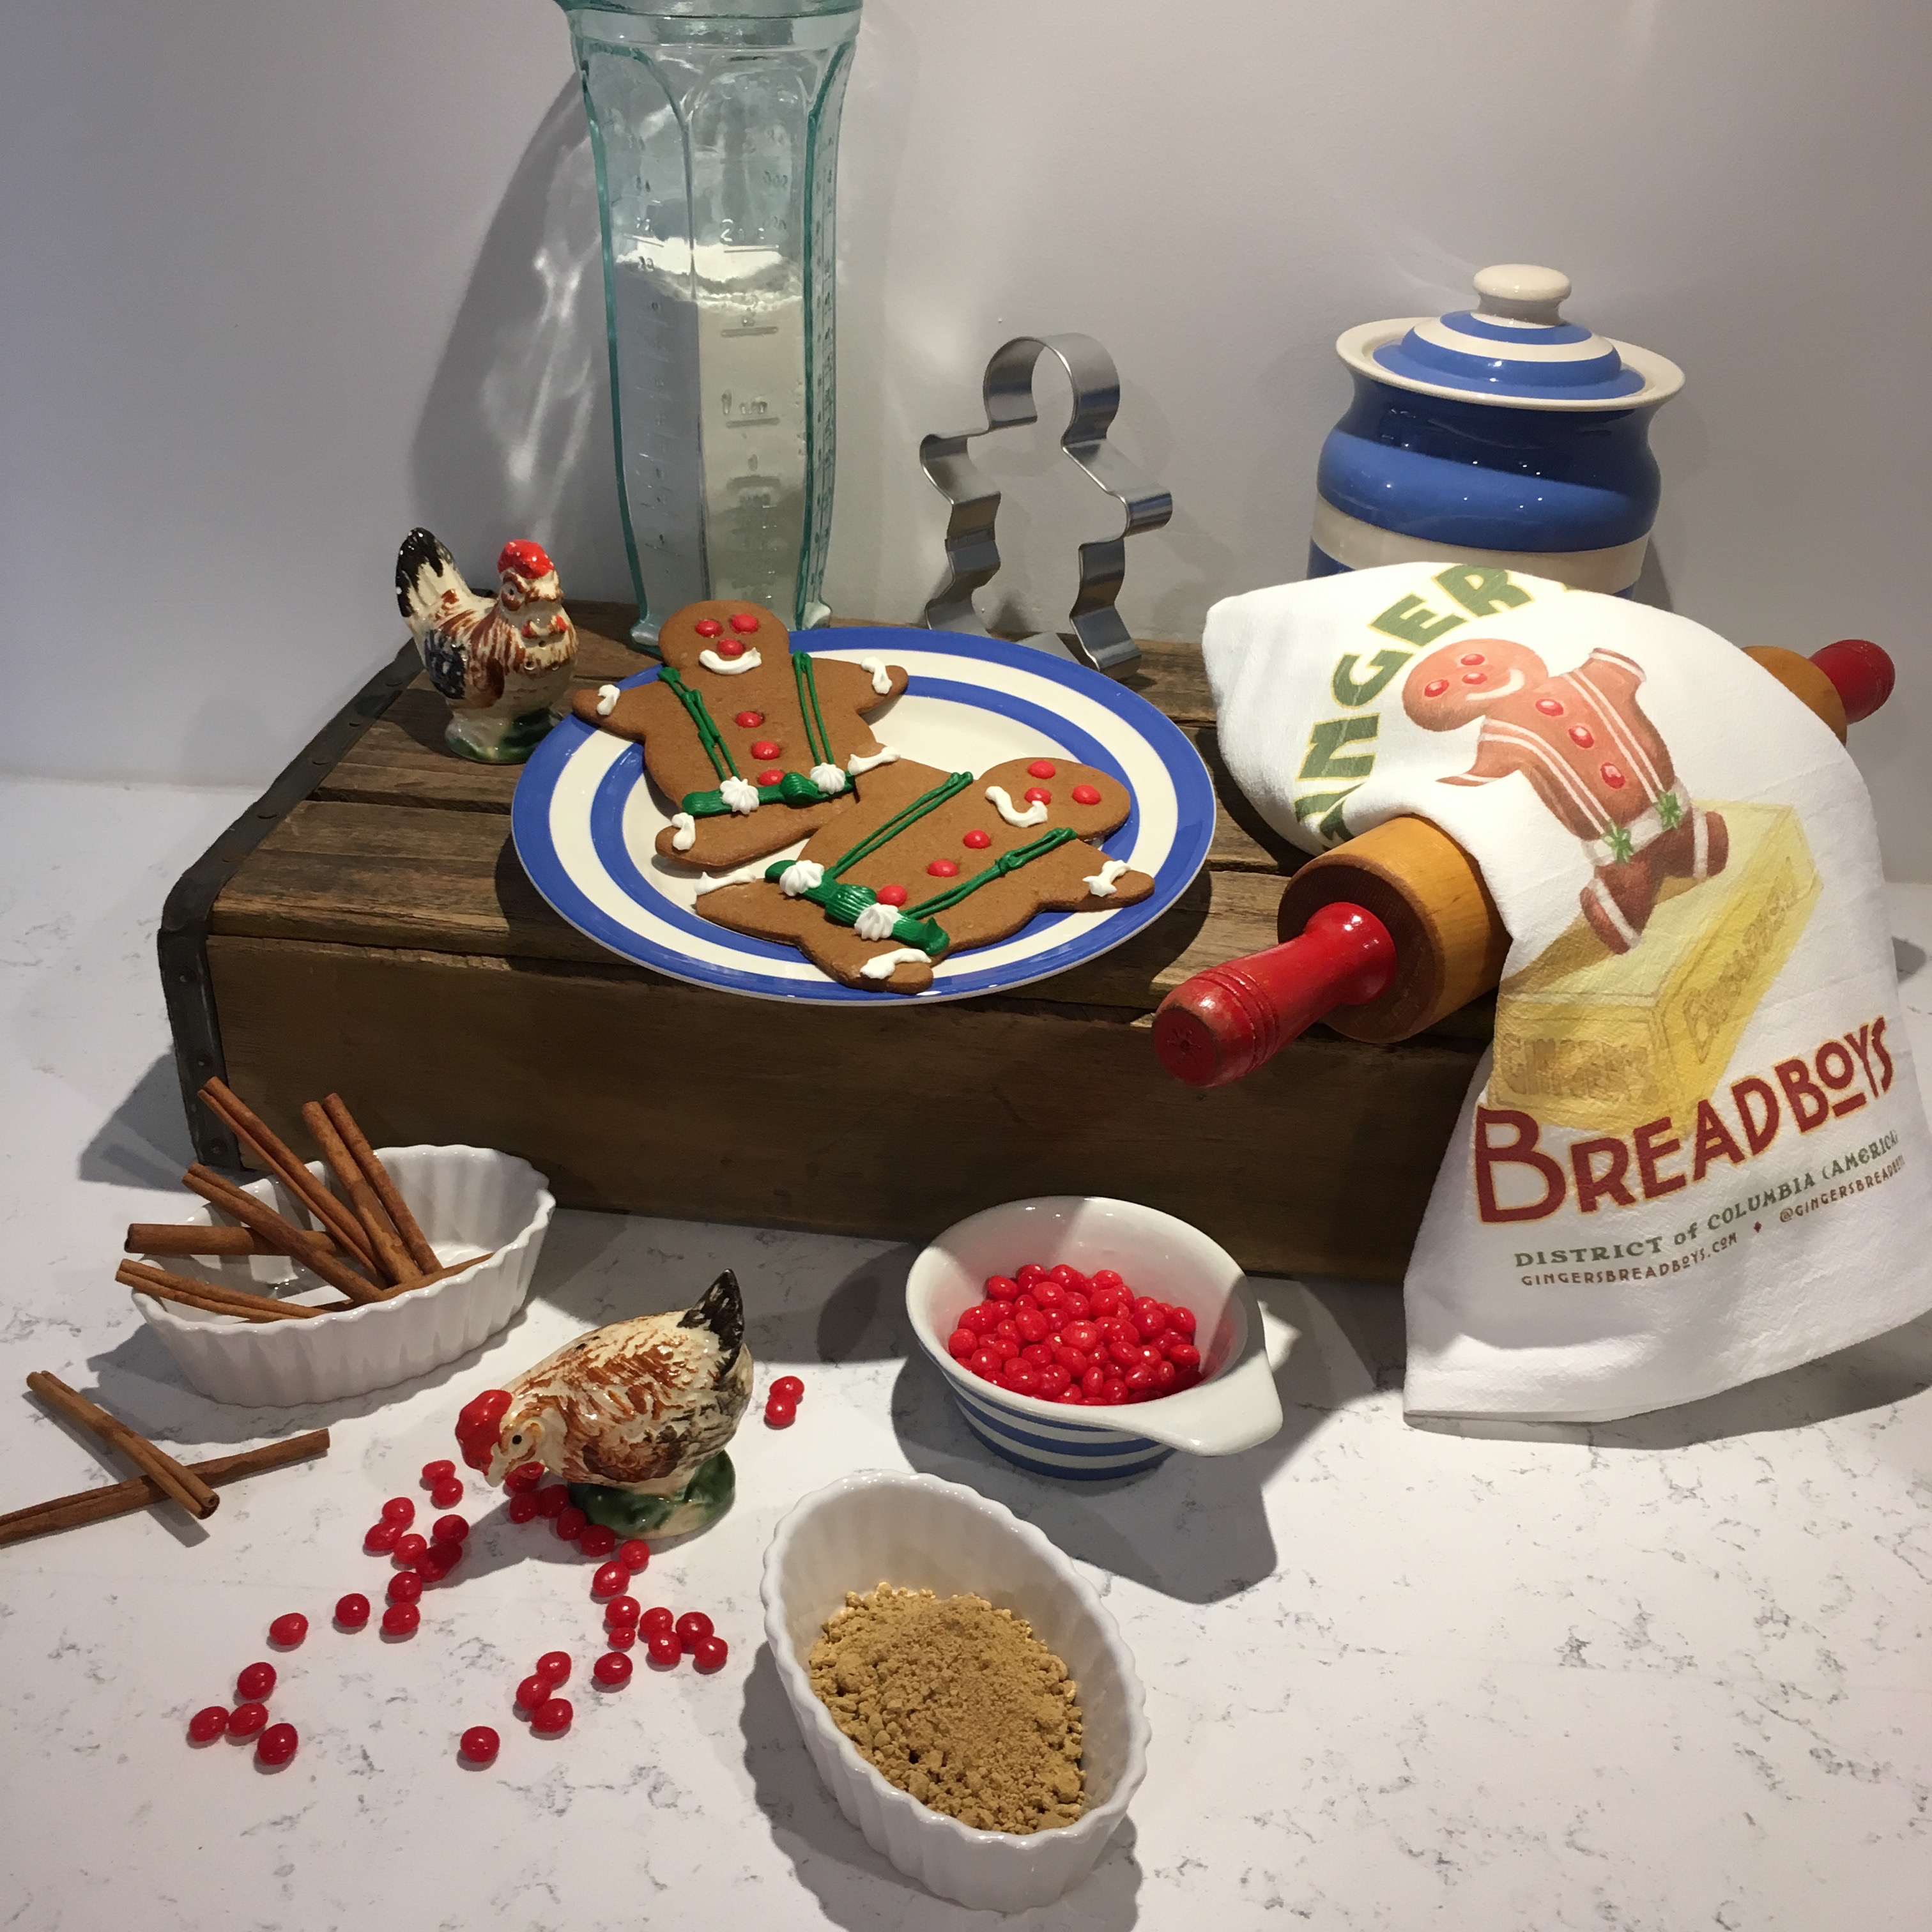 Gingerbread kit composition from Ginger's Breadboys